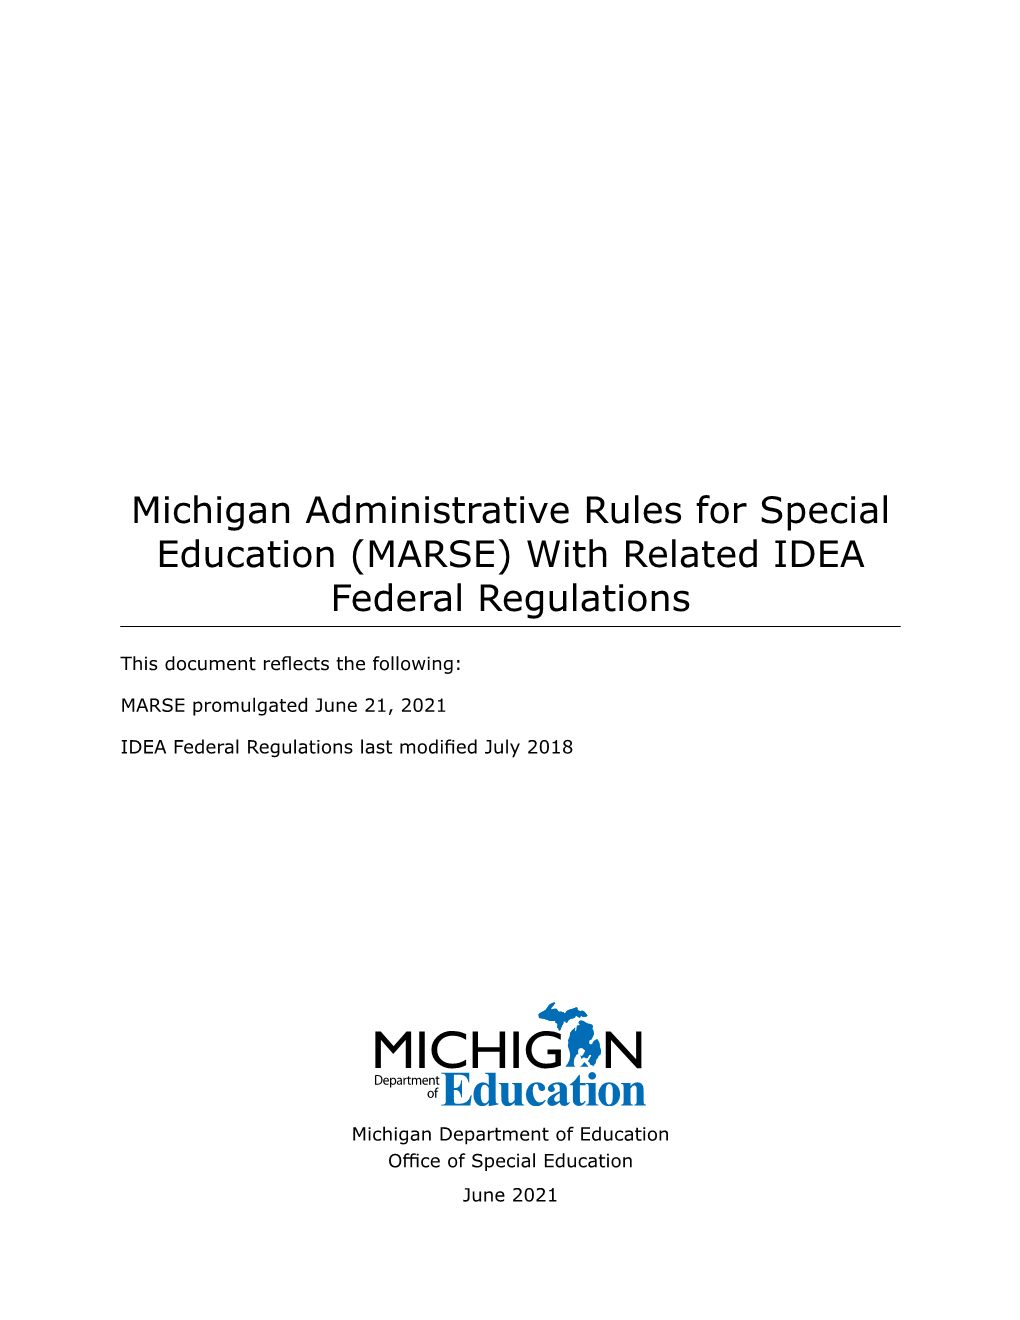 Michigan Administrative Rules for Special Education (MARSE) with Related IDEA Federal Regulations